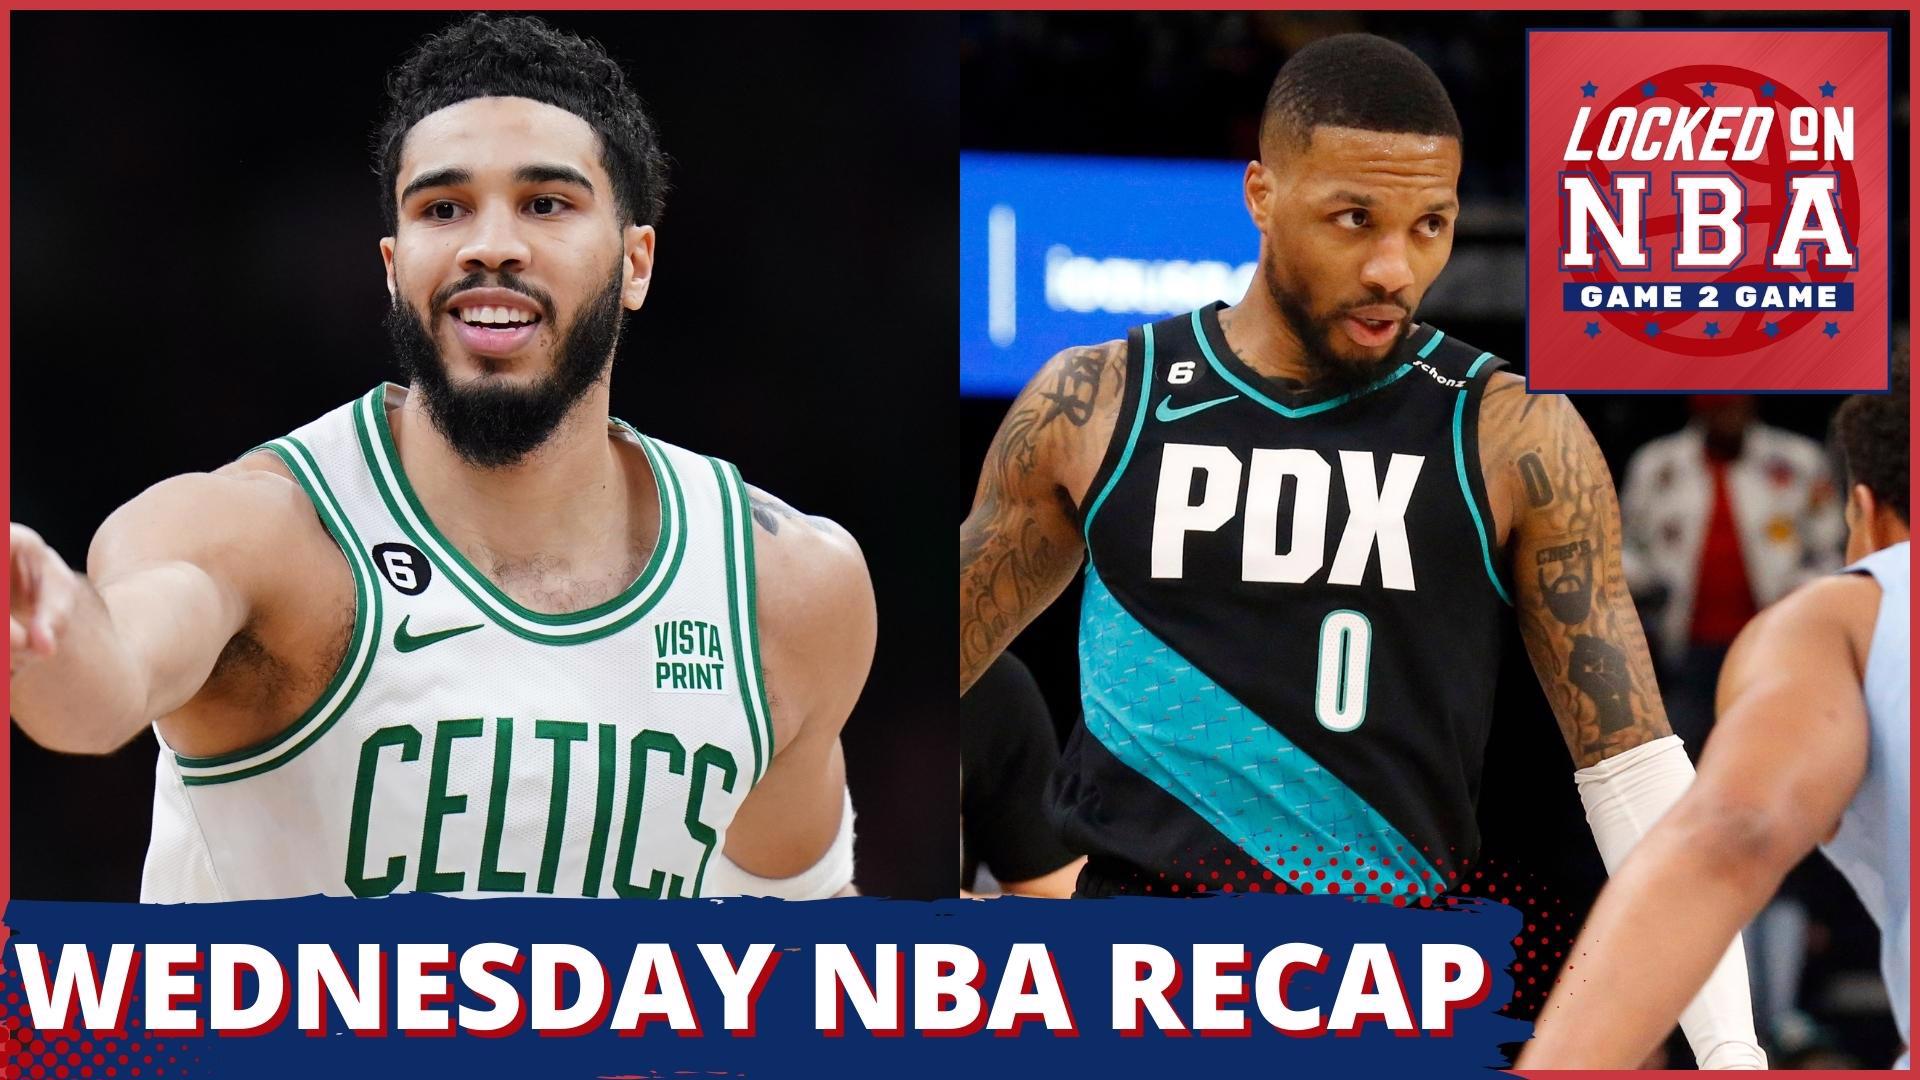 The latest in the NBA from the Celtics dominating the Nets to the Trailblazers taking advantage of a struggling Memphis team.